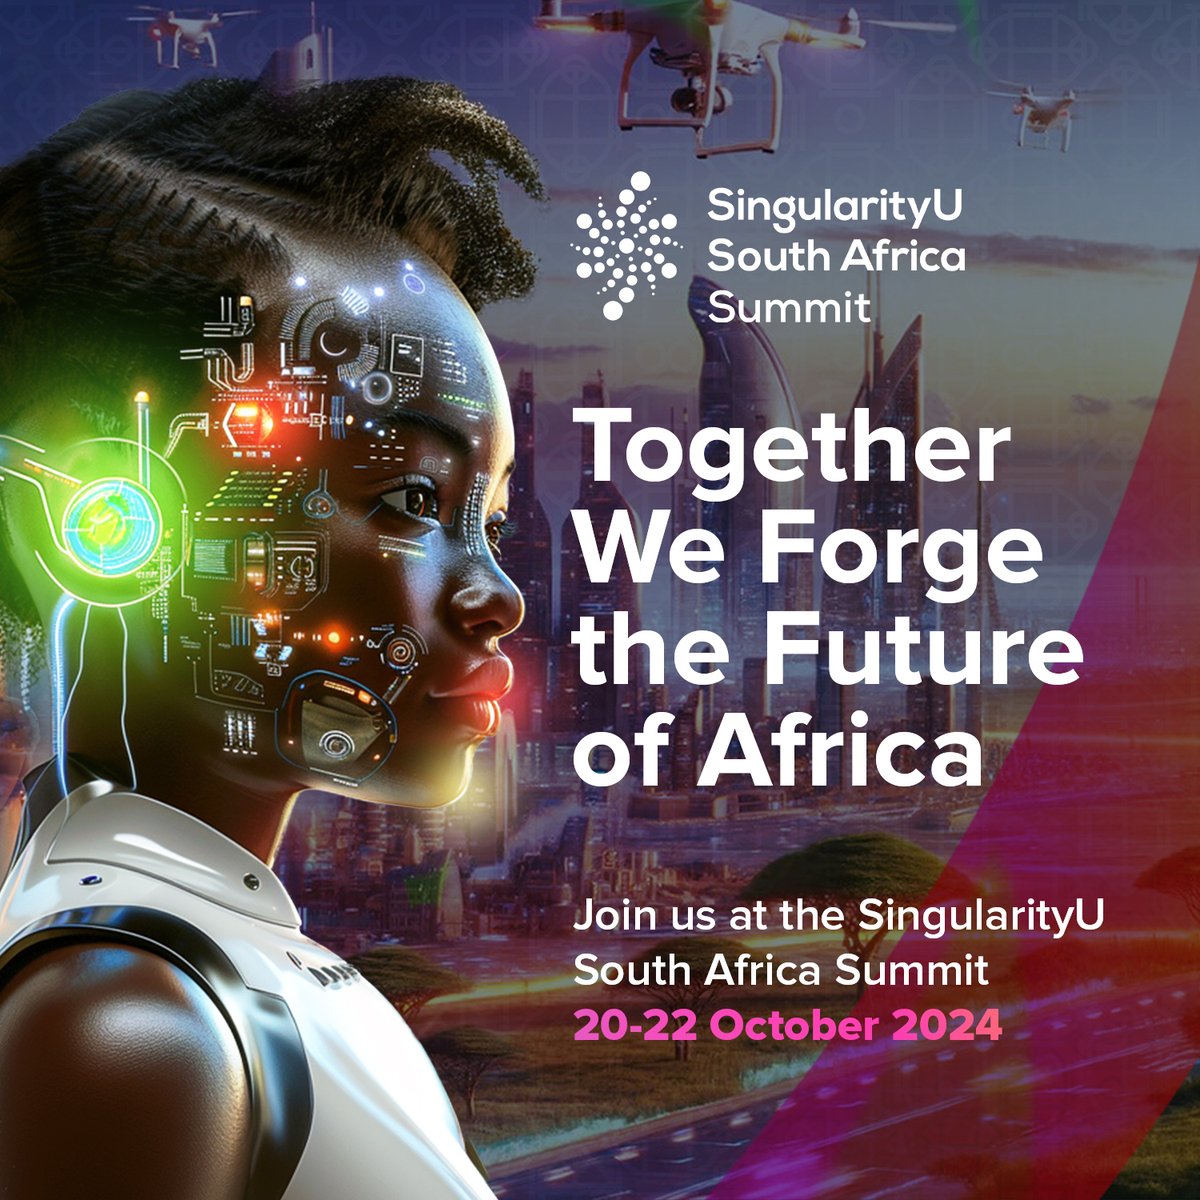 Together, we forge the future of Africa! 🌟
Join us at the SingularityU South Africa Summit and let's create history together!
💡Find out more ⬇️⬇️
susasummit.org
20 - 22 October 2024!  
#futureproofafrica